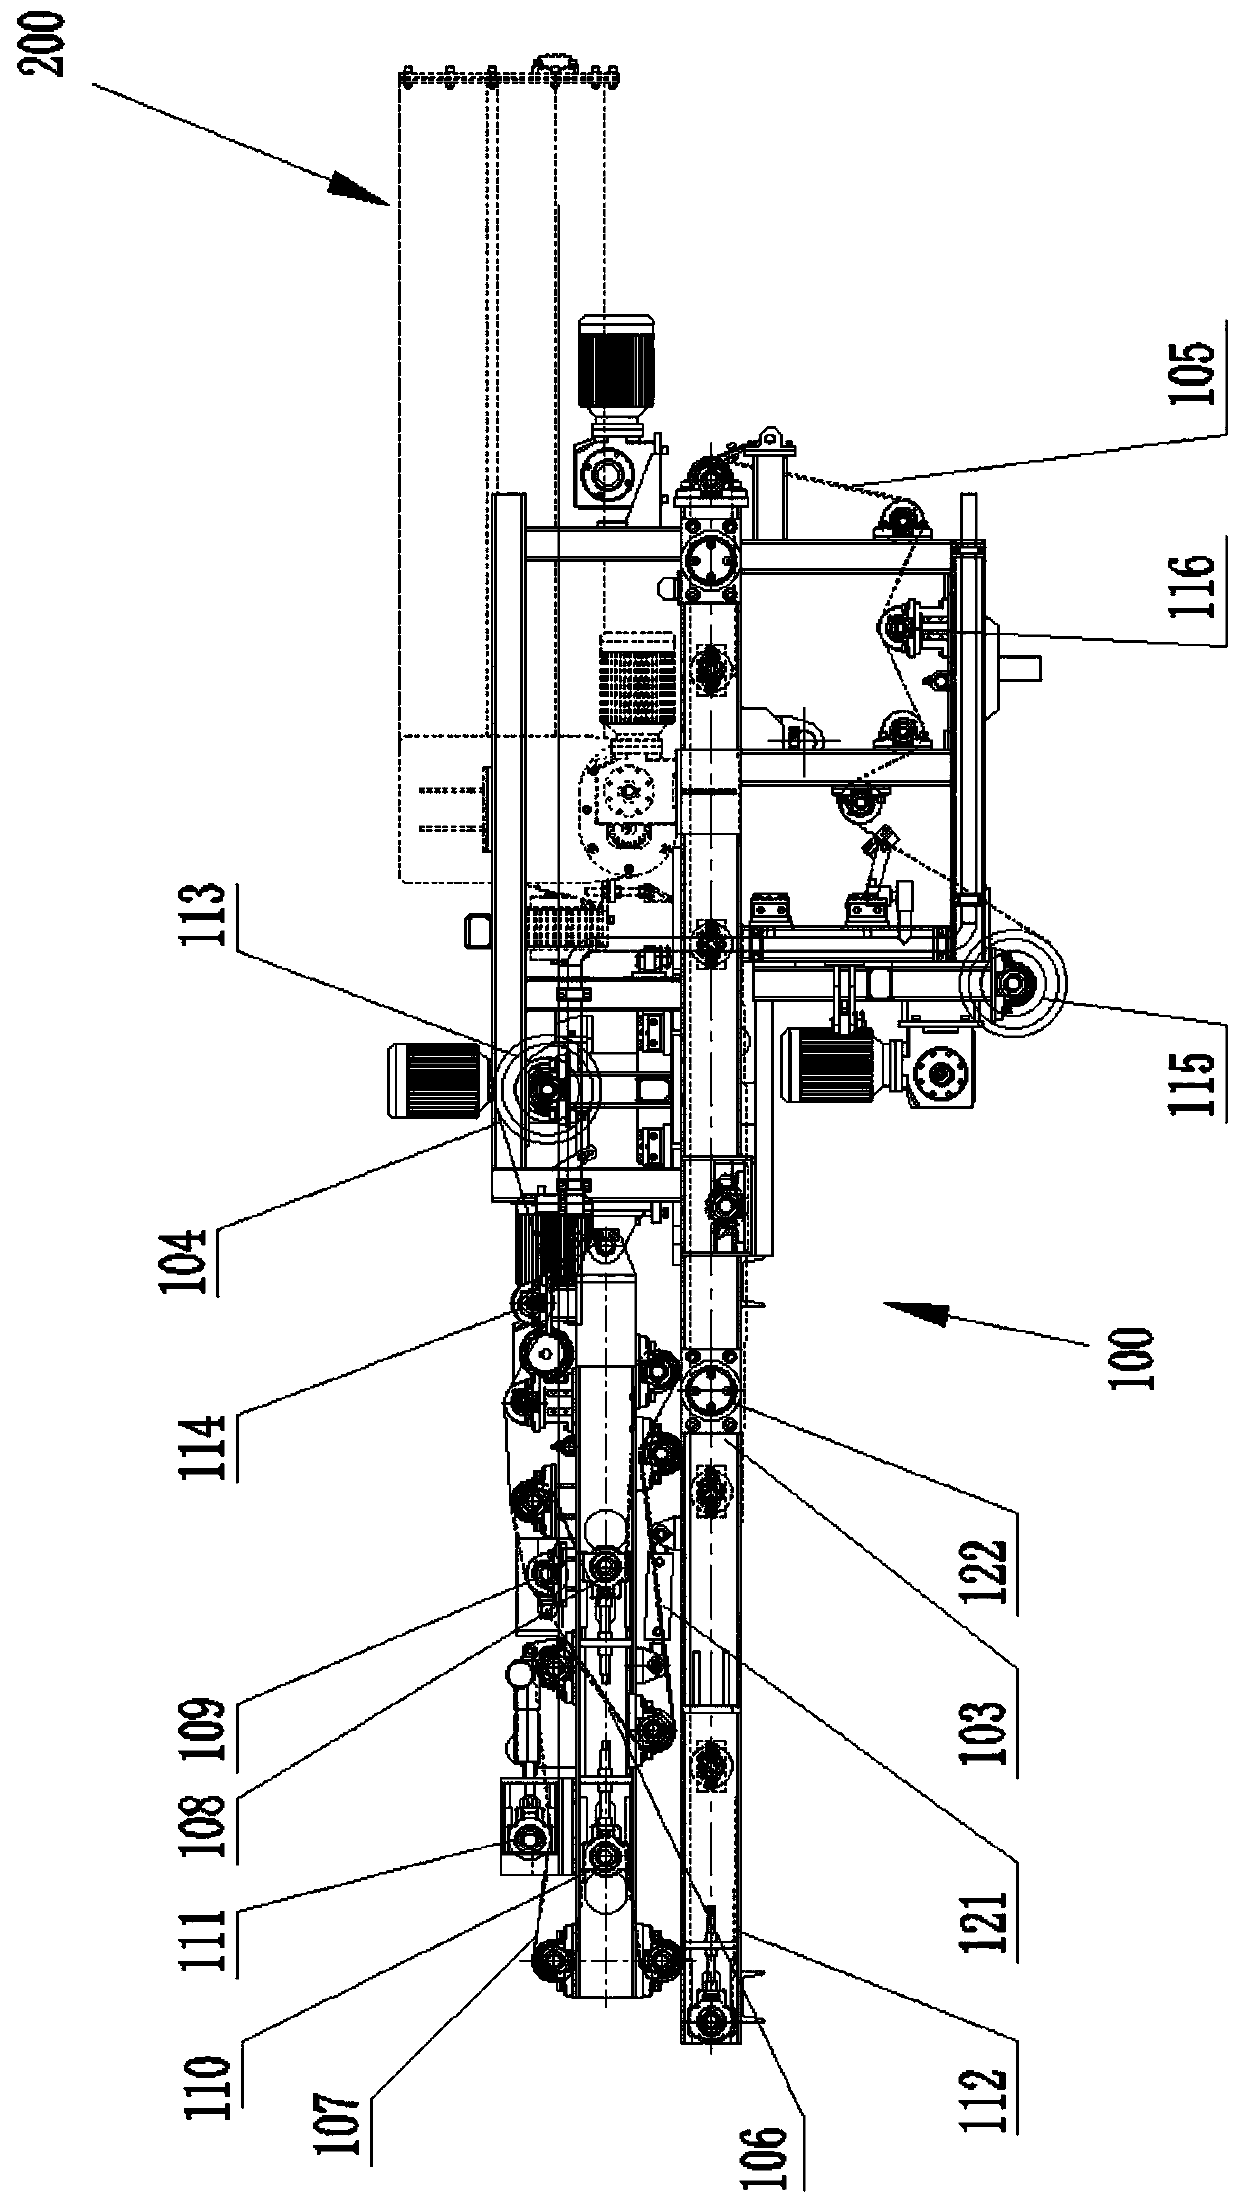 Laminated filter pressing device